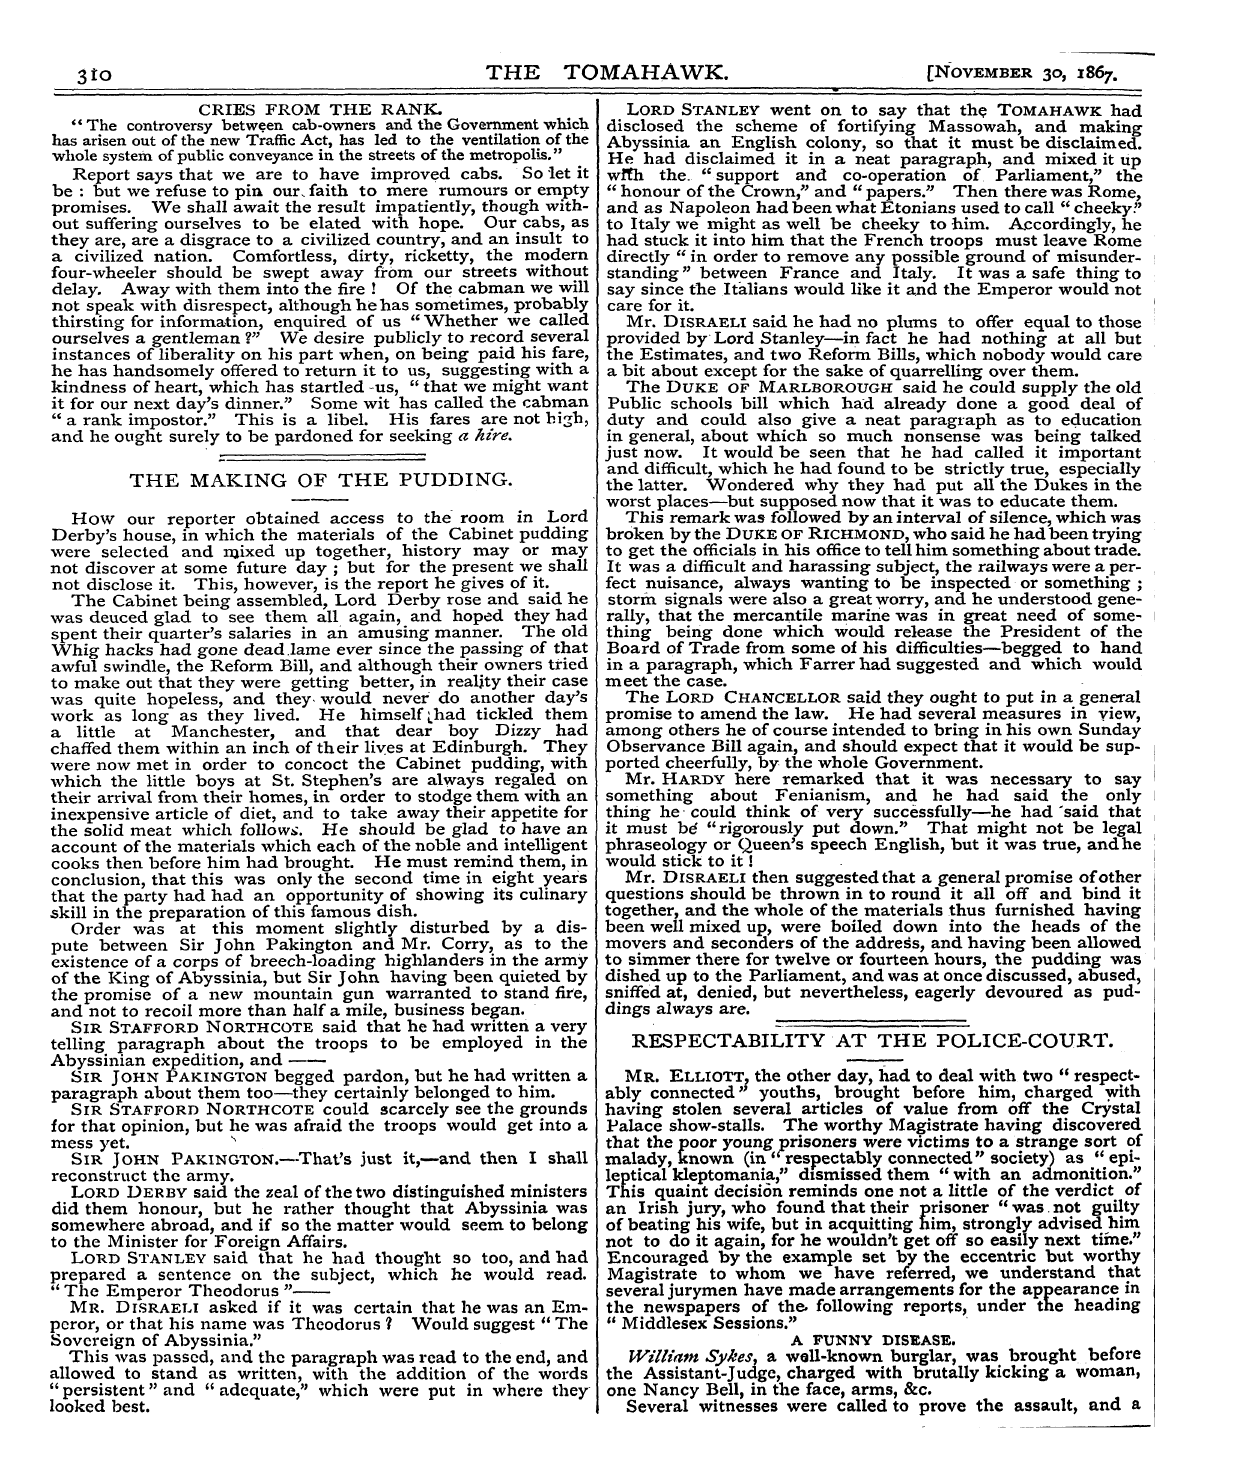 Tomahawk (1867-1870): jS F Y, 1st edition - 3 To The Tomahawk. [November 30, 186 7.